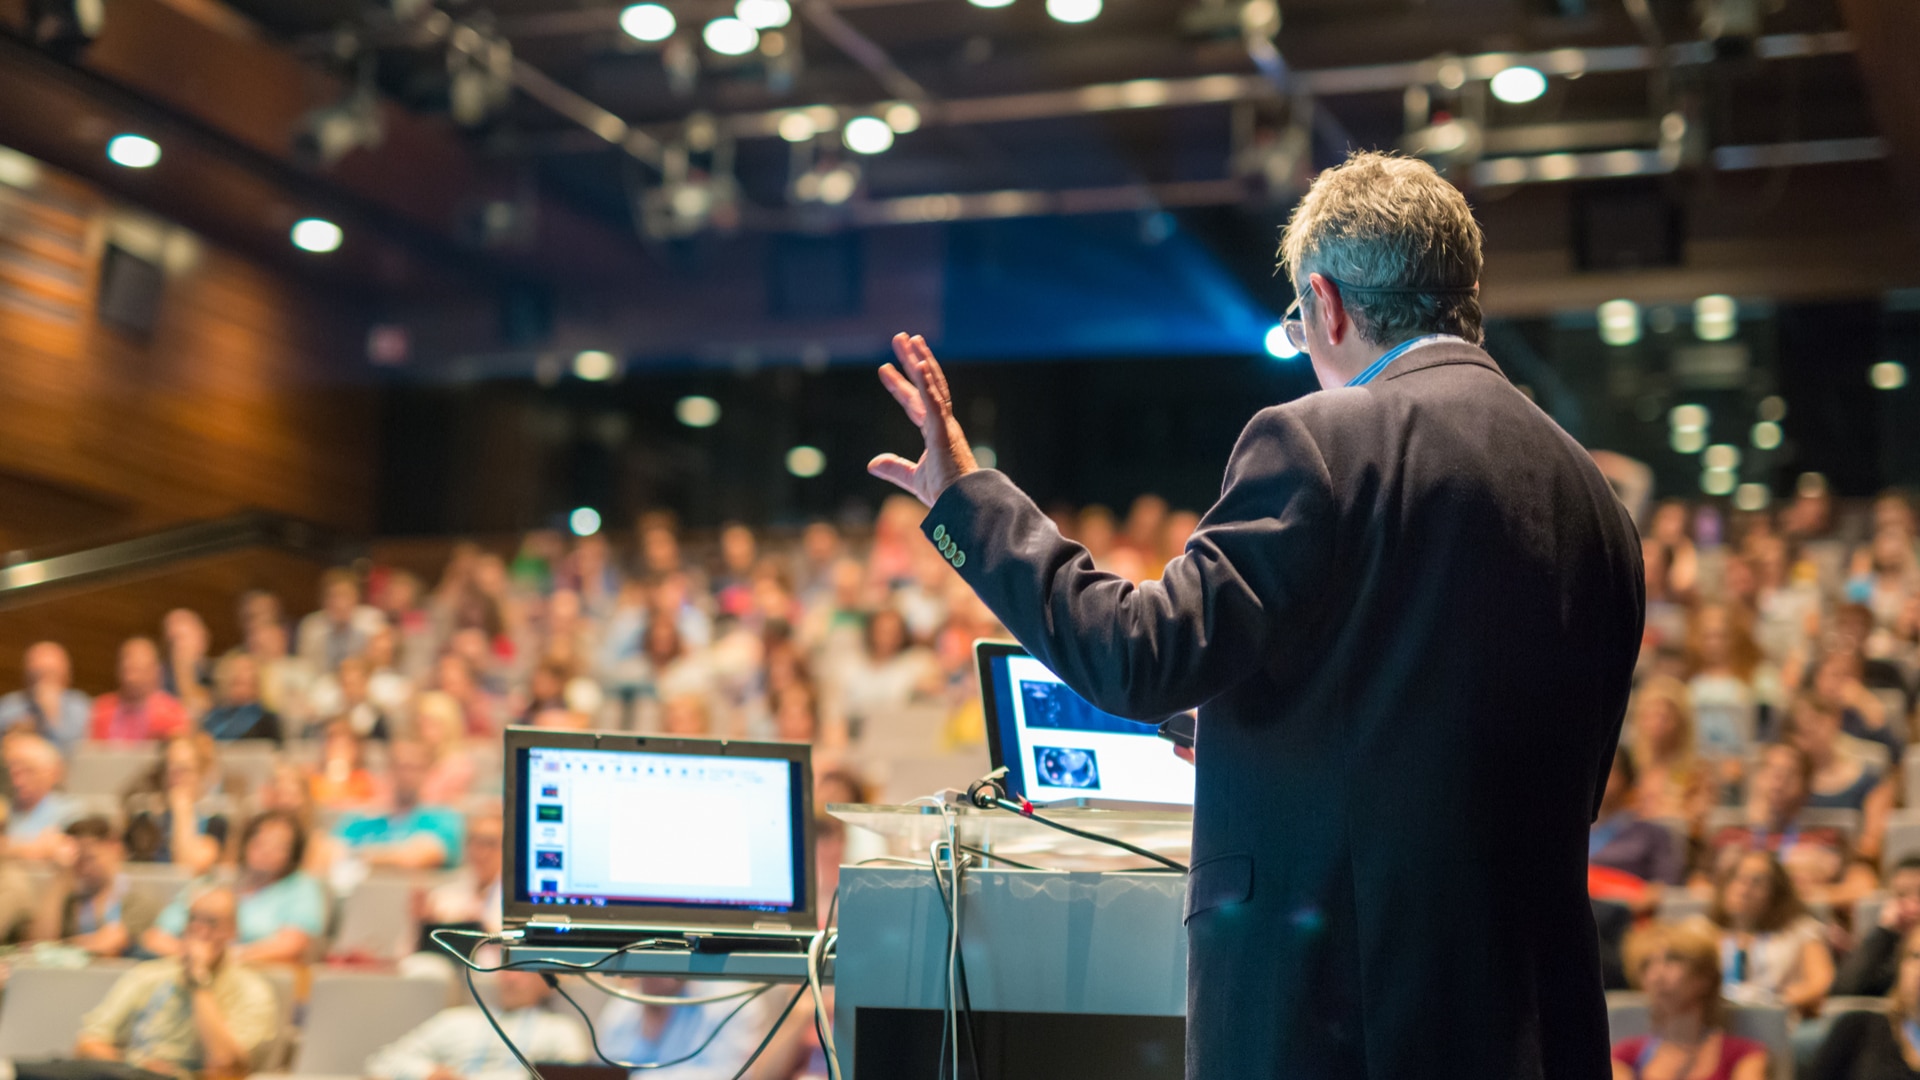 PowerPoint Hacks You Did Not Know For Effective Presentations